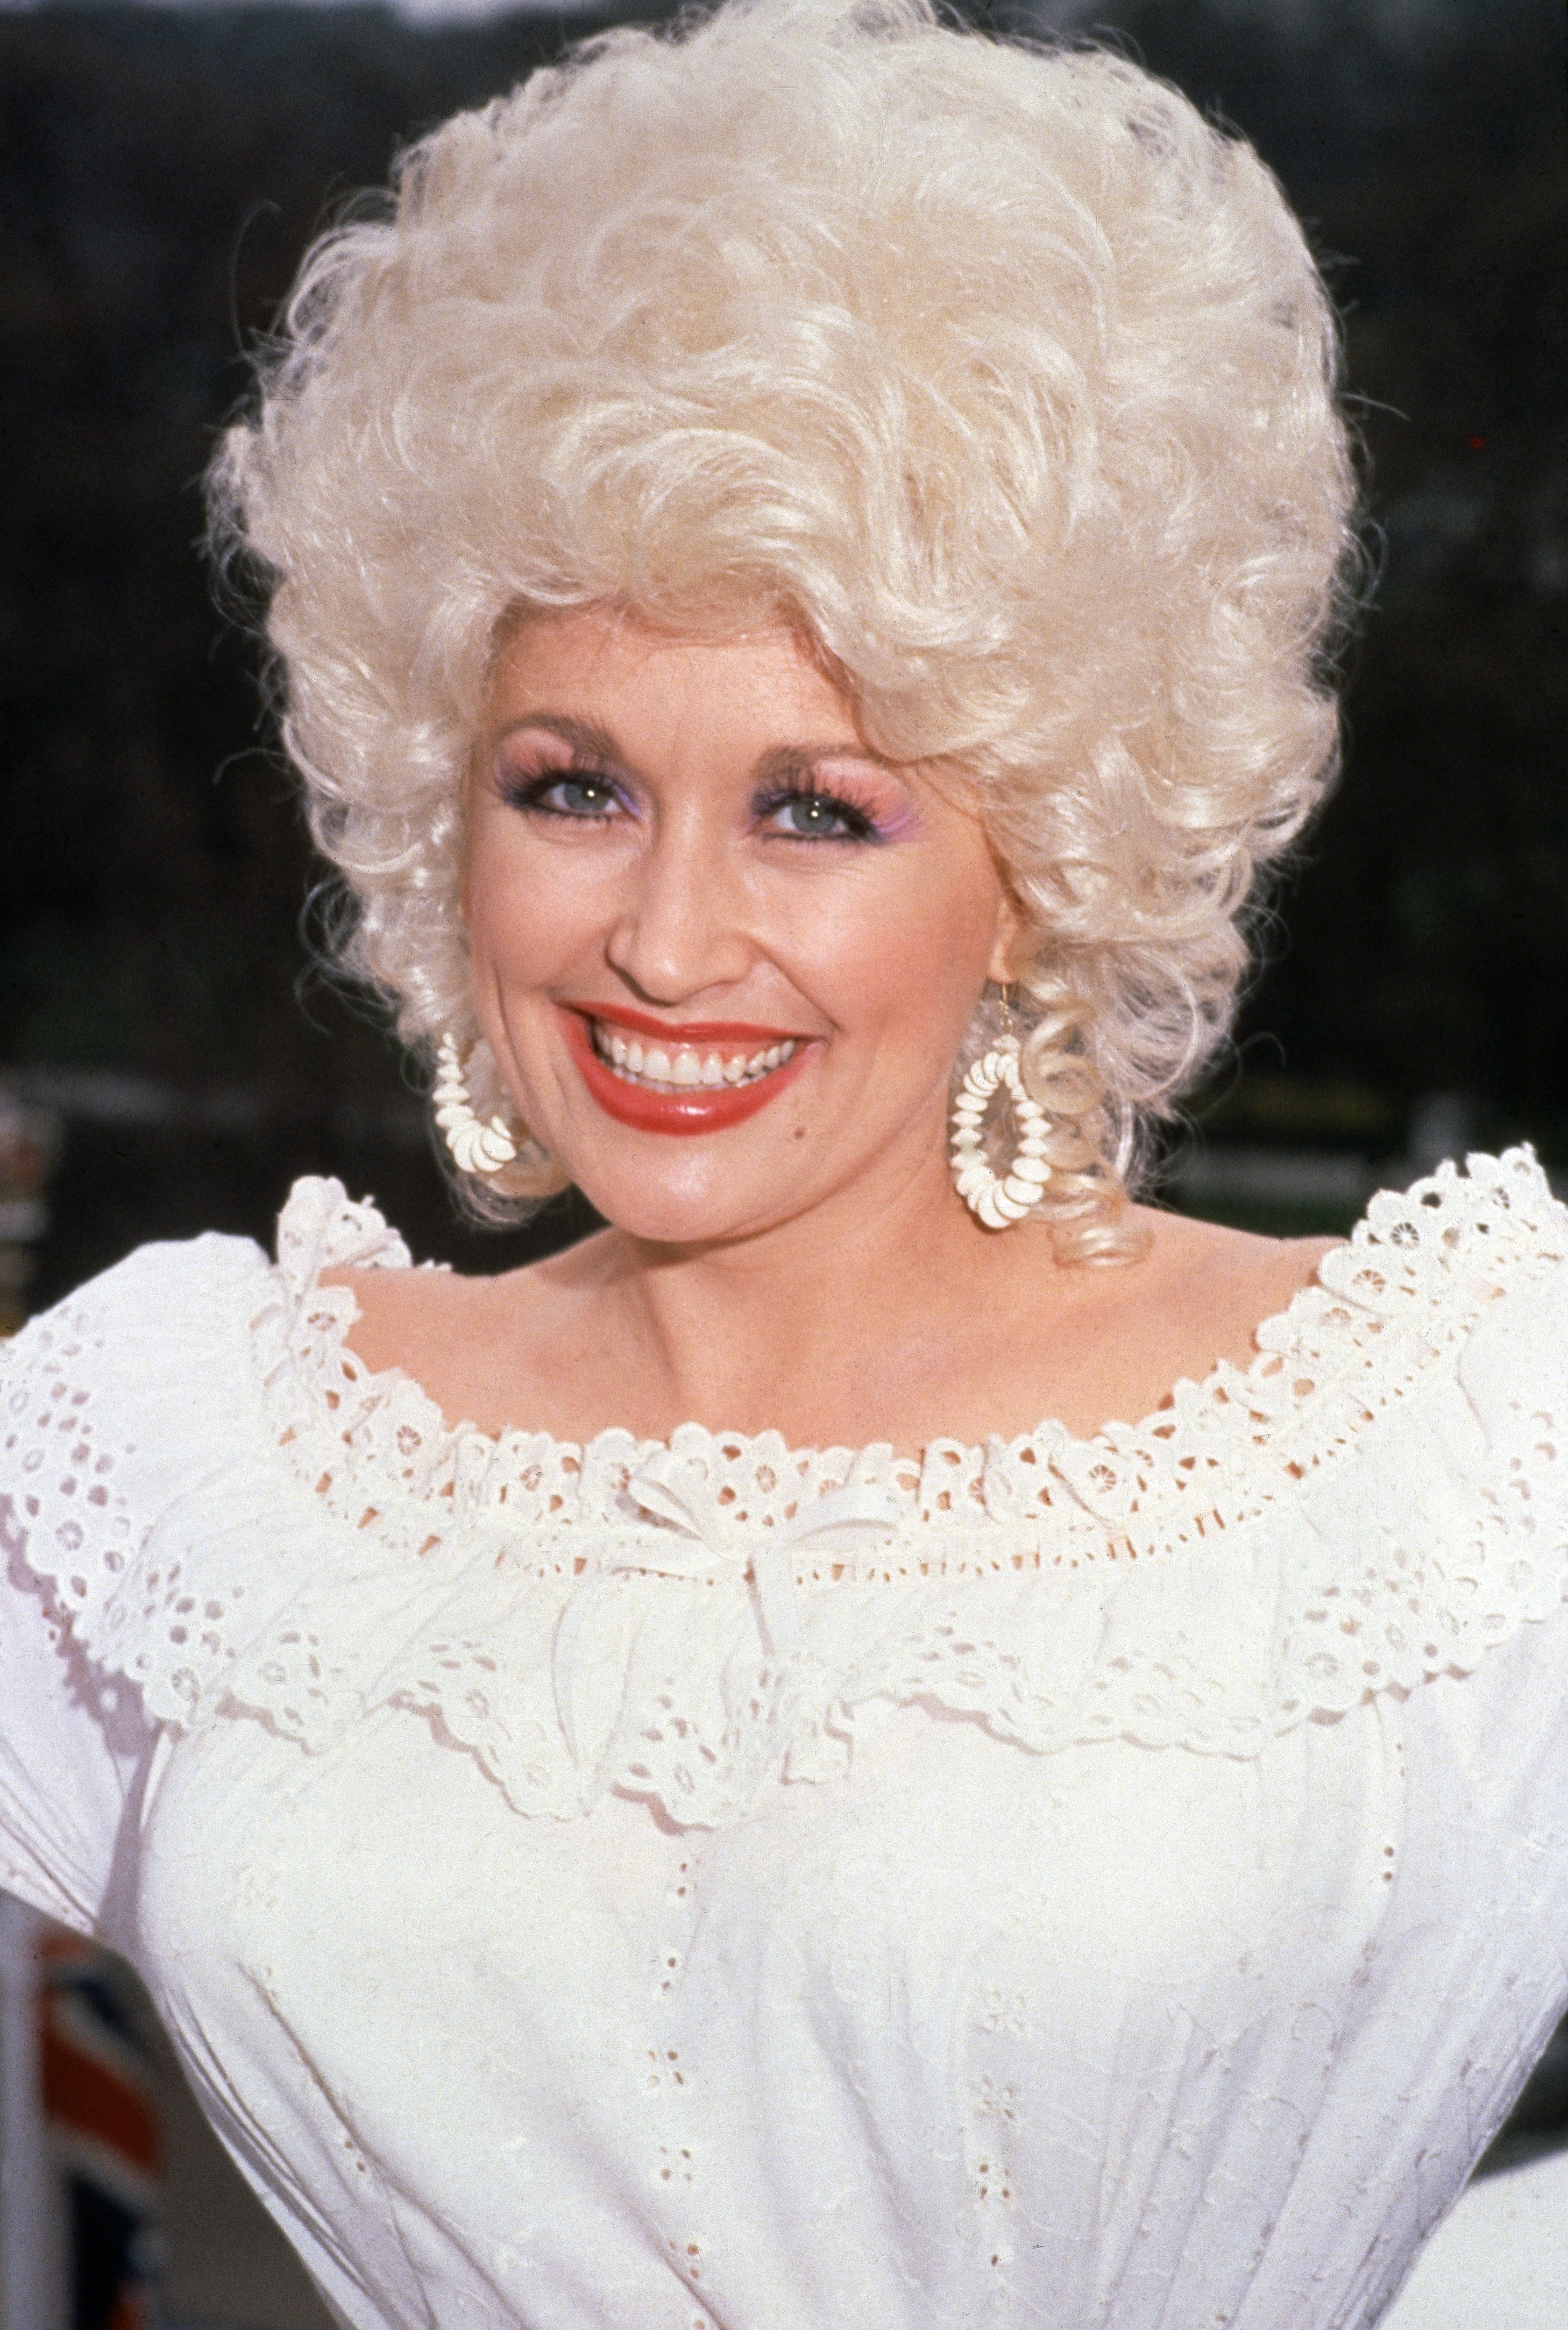 Dolly Parton in London in 1983 | Photo: Getty Images